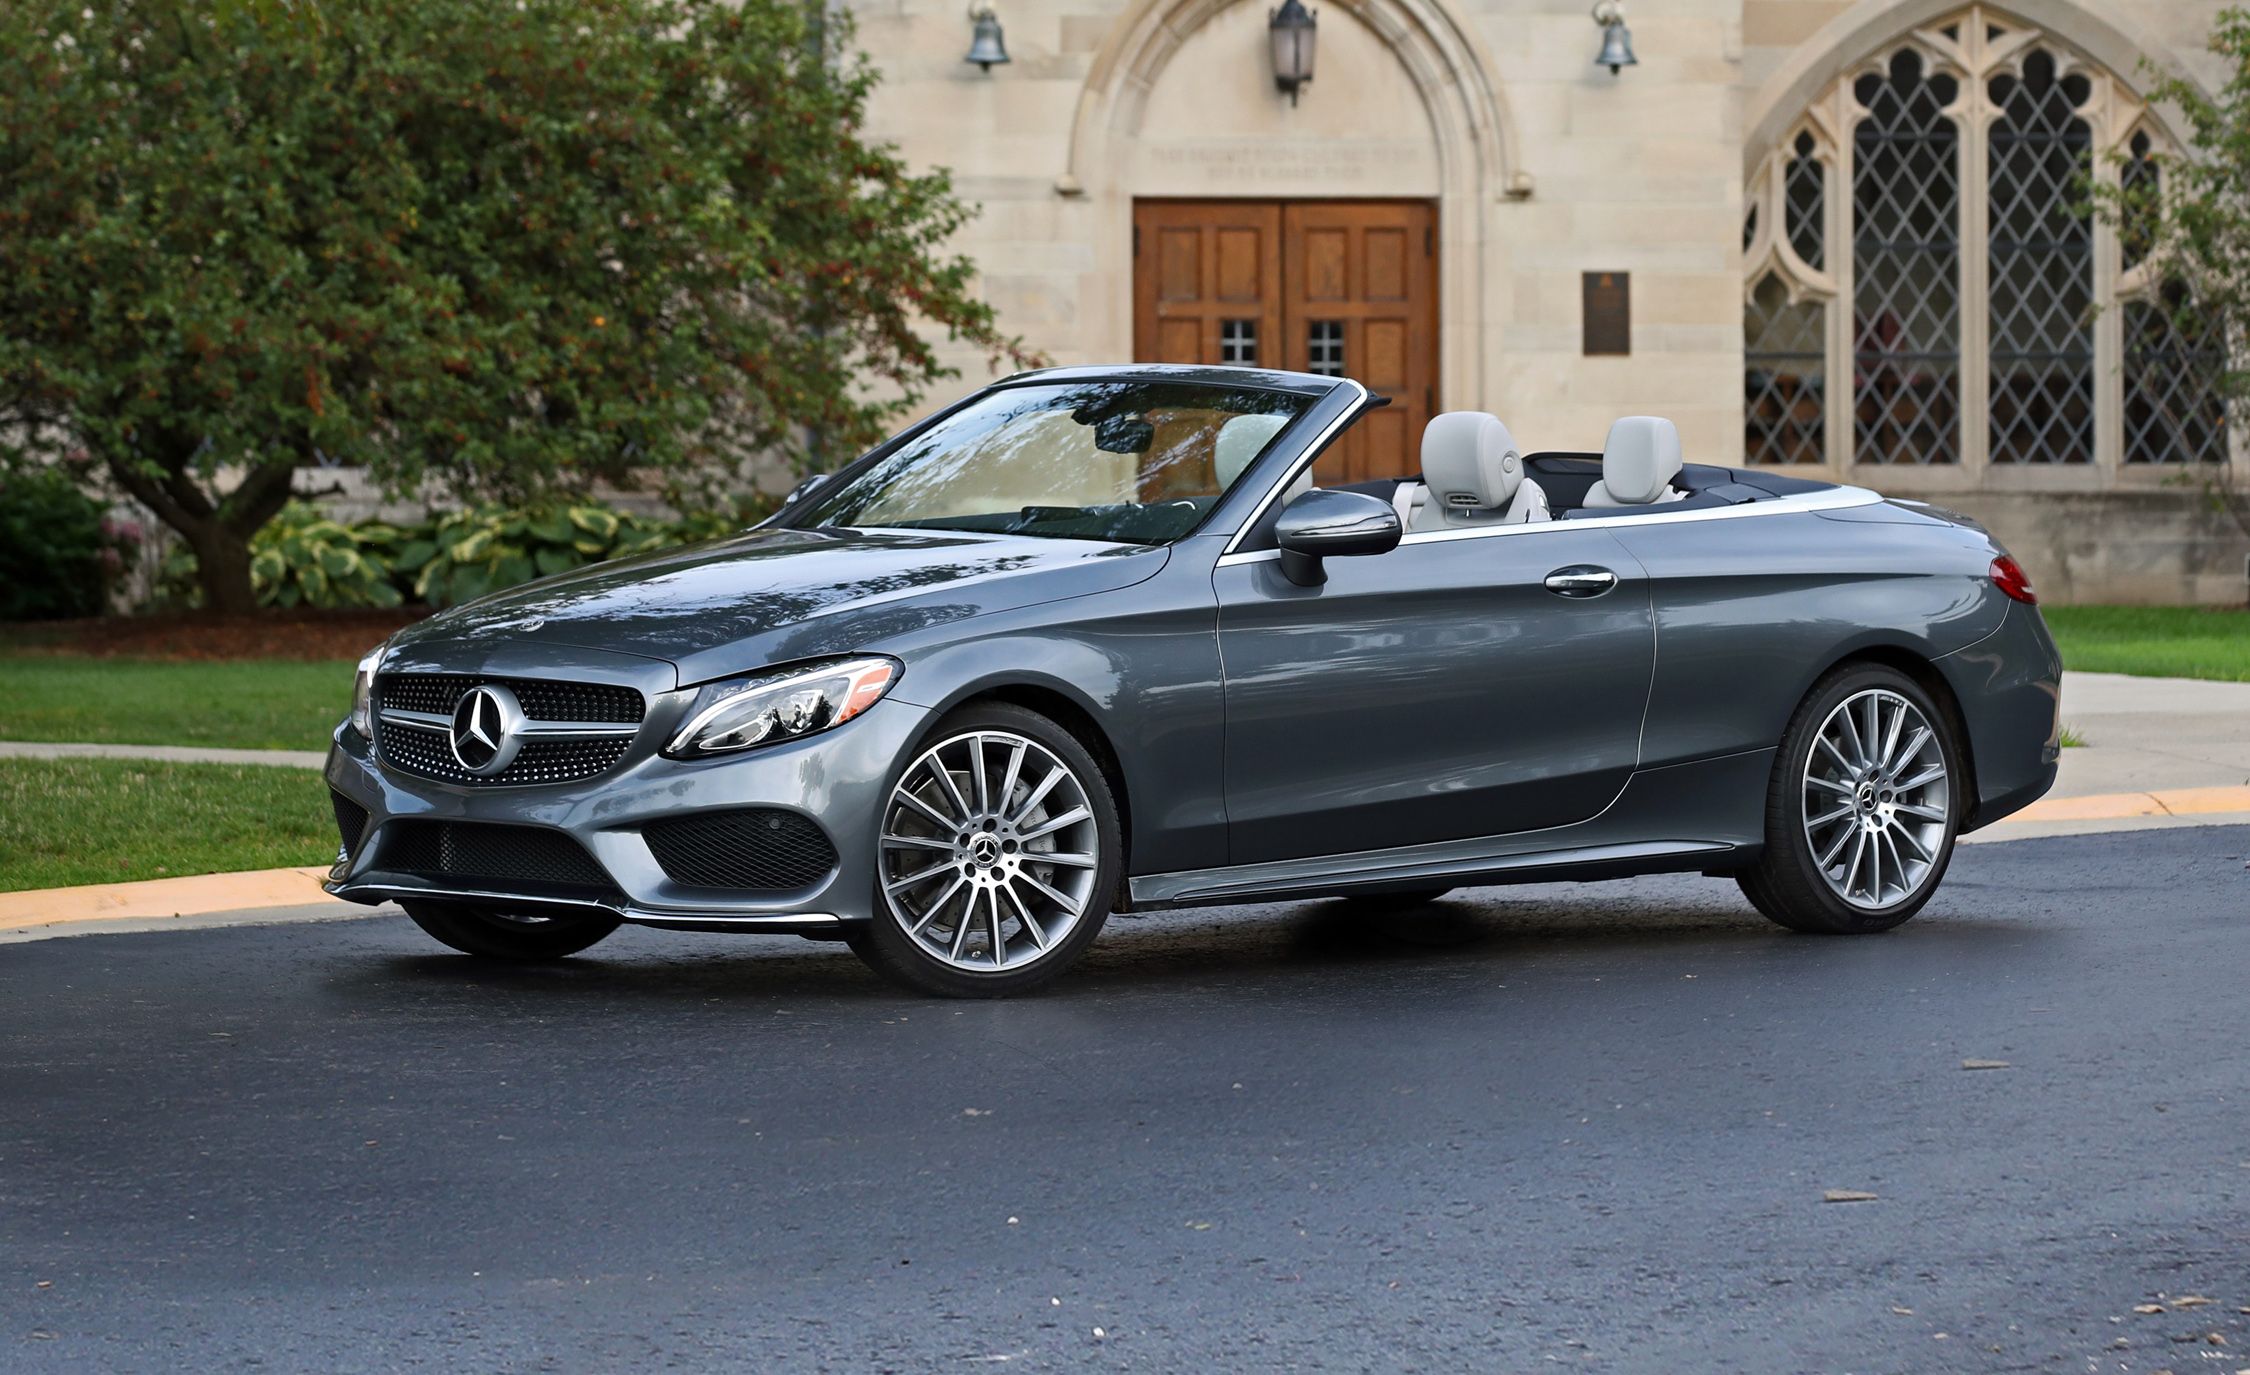 2018 MercedesBenz C300 Cabriolet Test Review Car and Driver